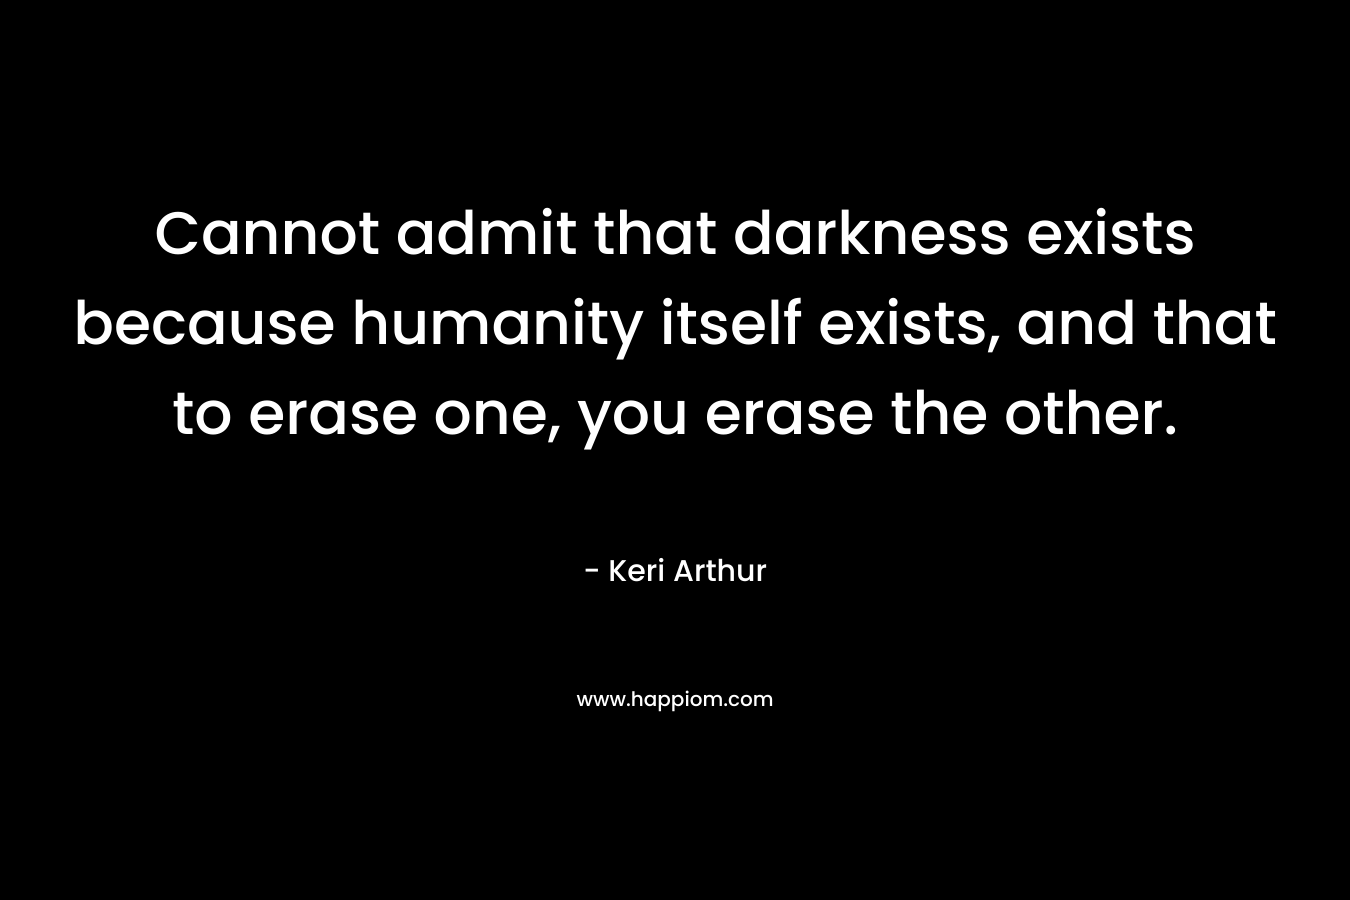 Cannot admit that darkness exists because humanity itself exists, and that to erase one, you erase the other.